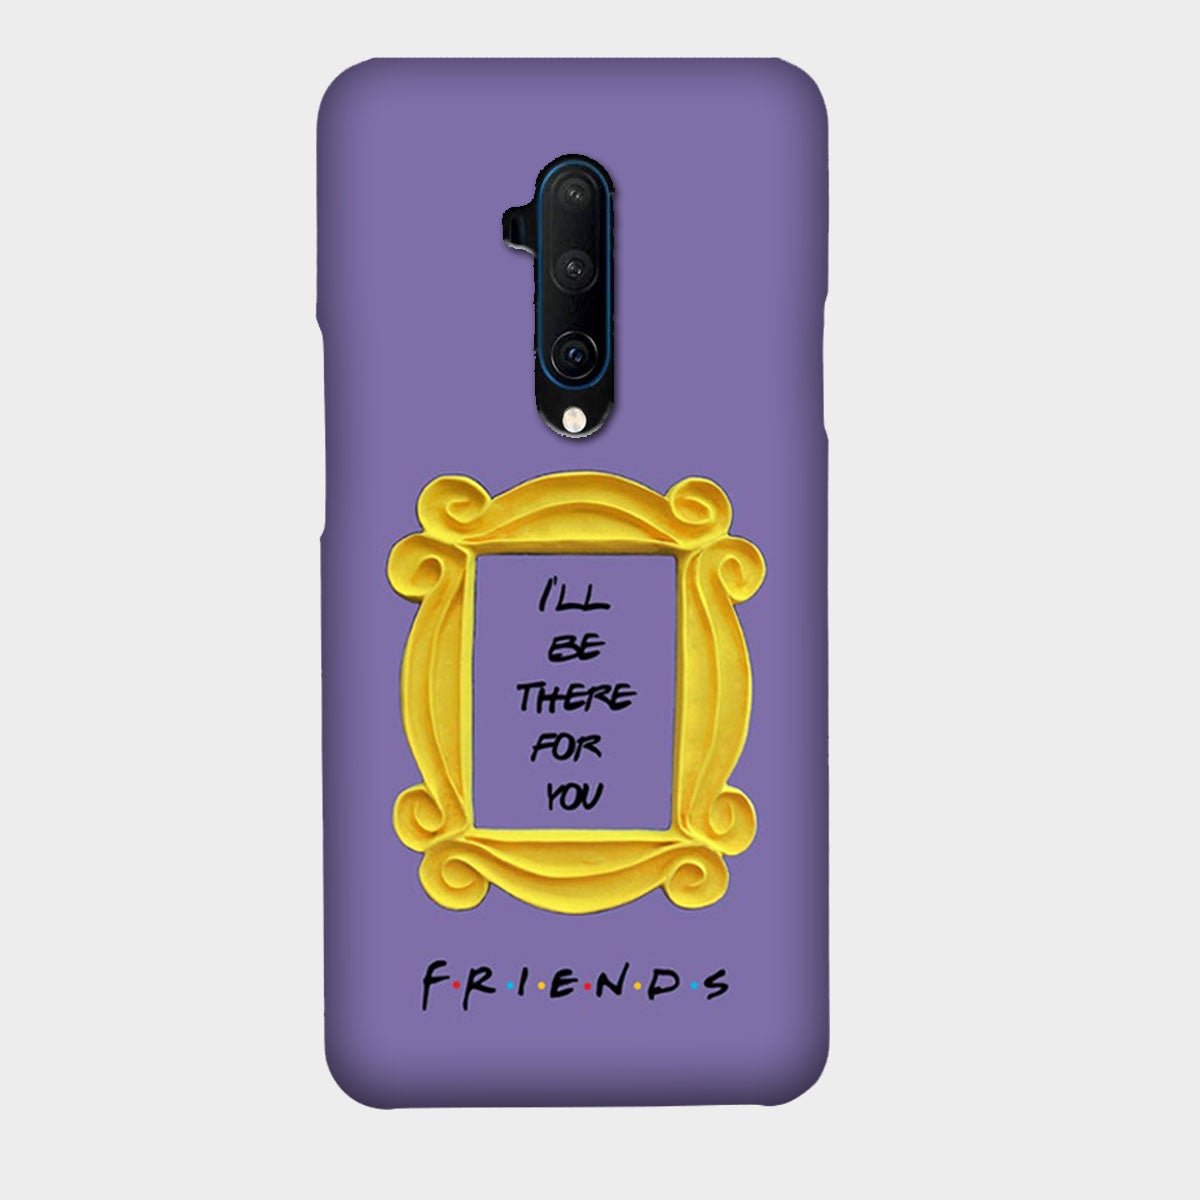 Friends - Frame - I'll be There for You - Mobile Phone Cover - Hard Case - OnePlus